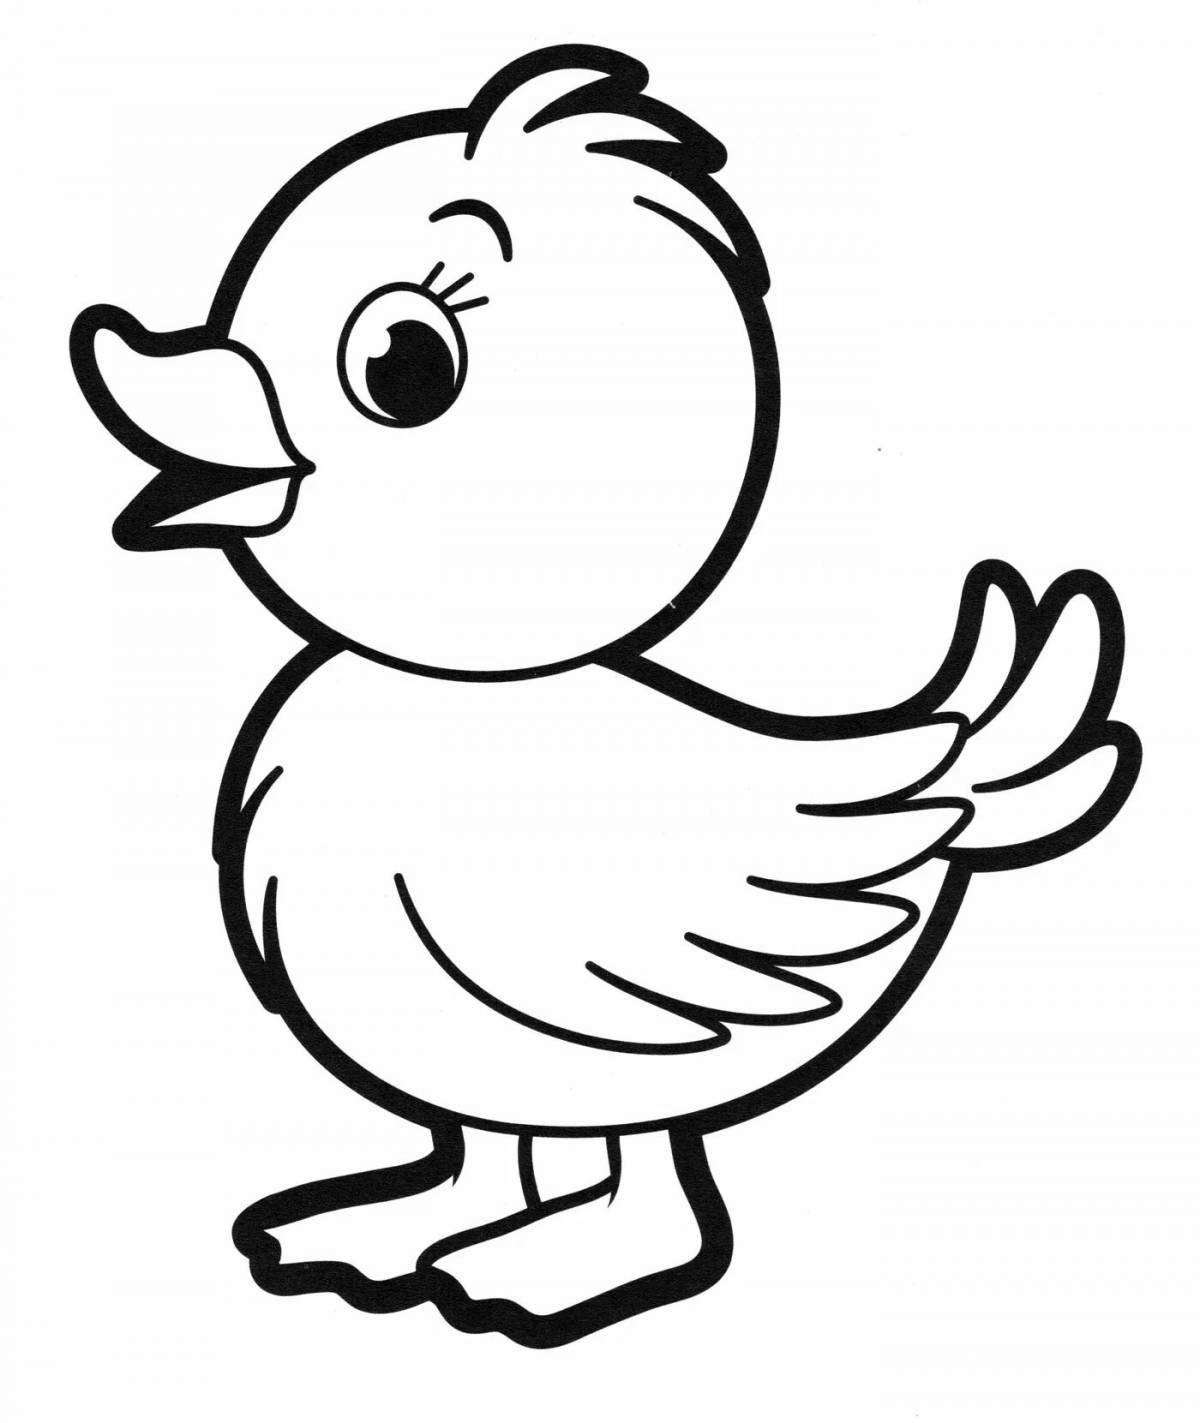 Animated duckling coloring page